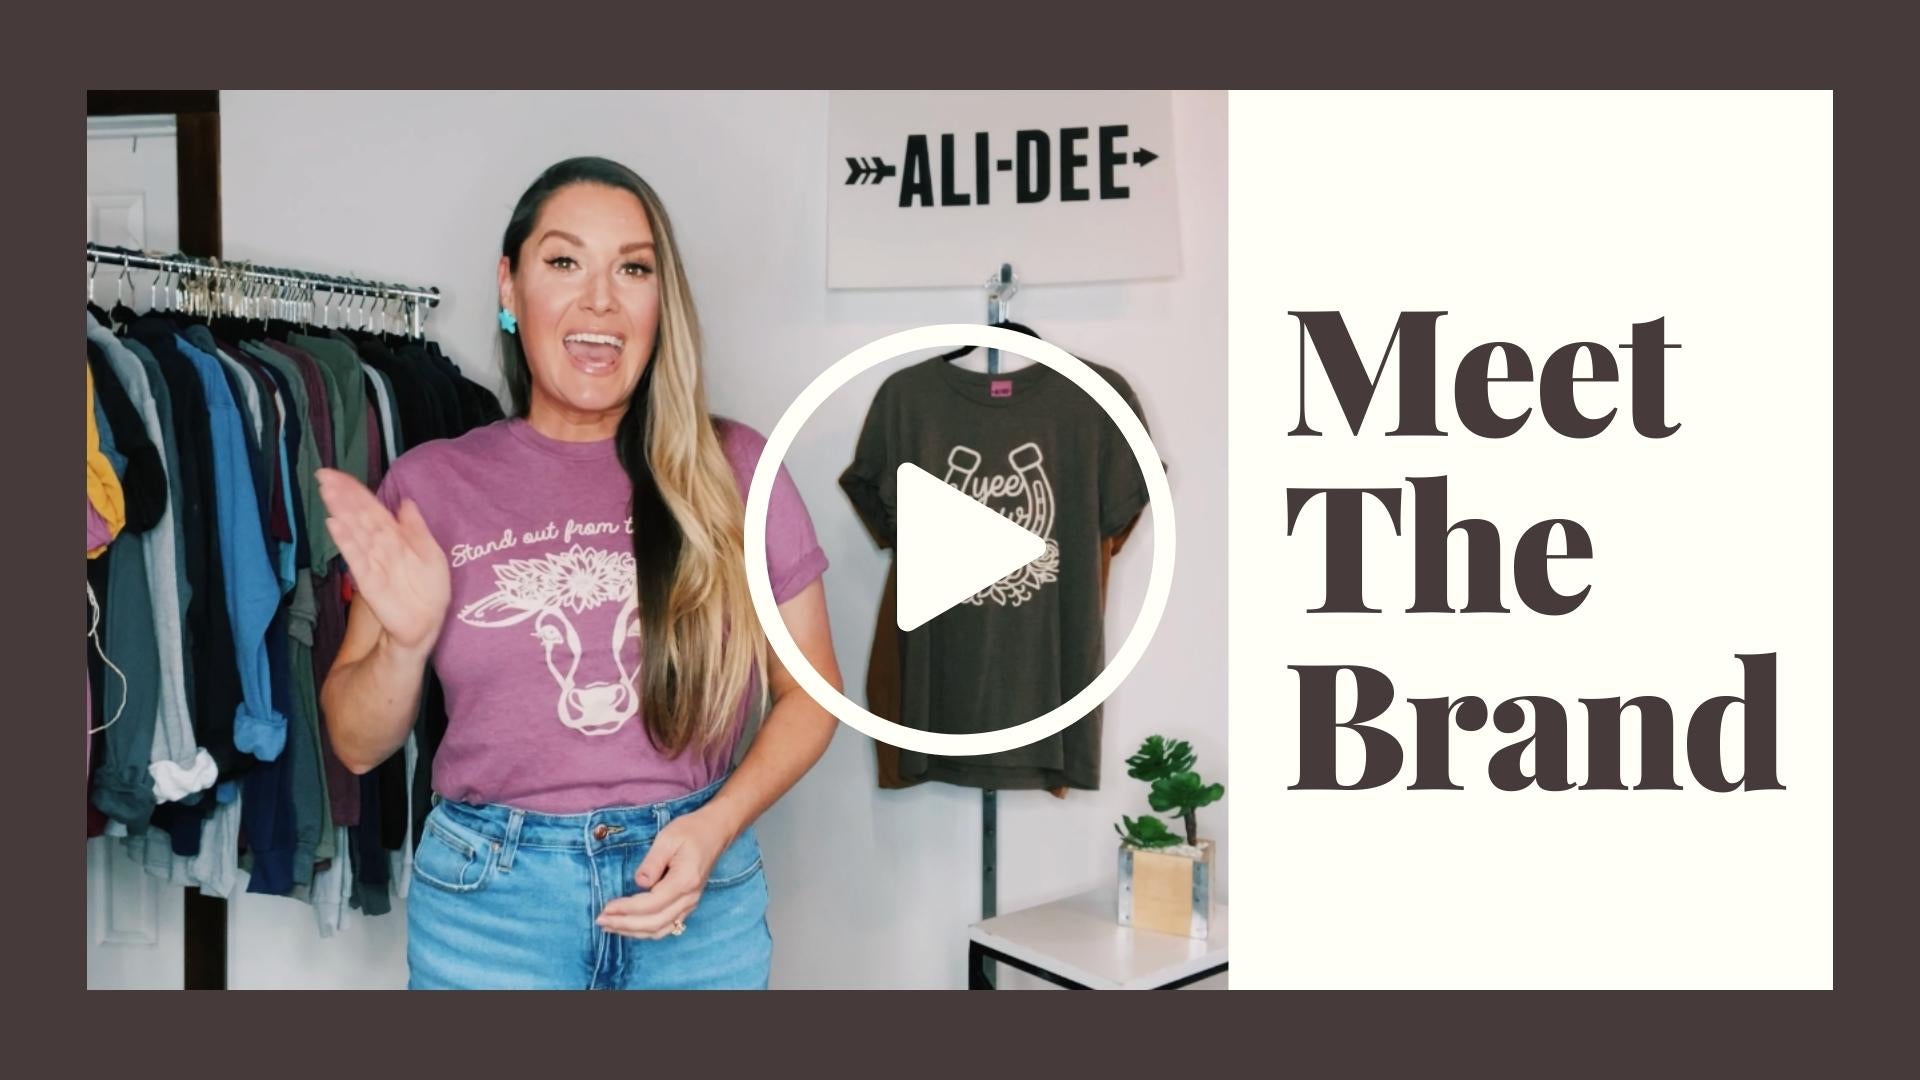 Load video: Ali Dee introduces the brand and talks about brand basics, like fit, sizing, and comfort.